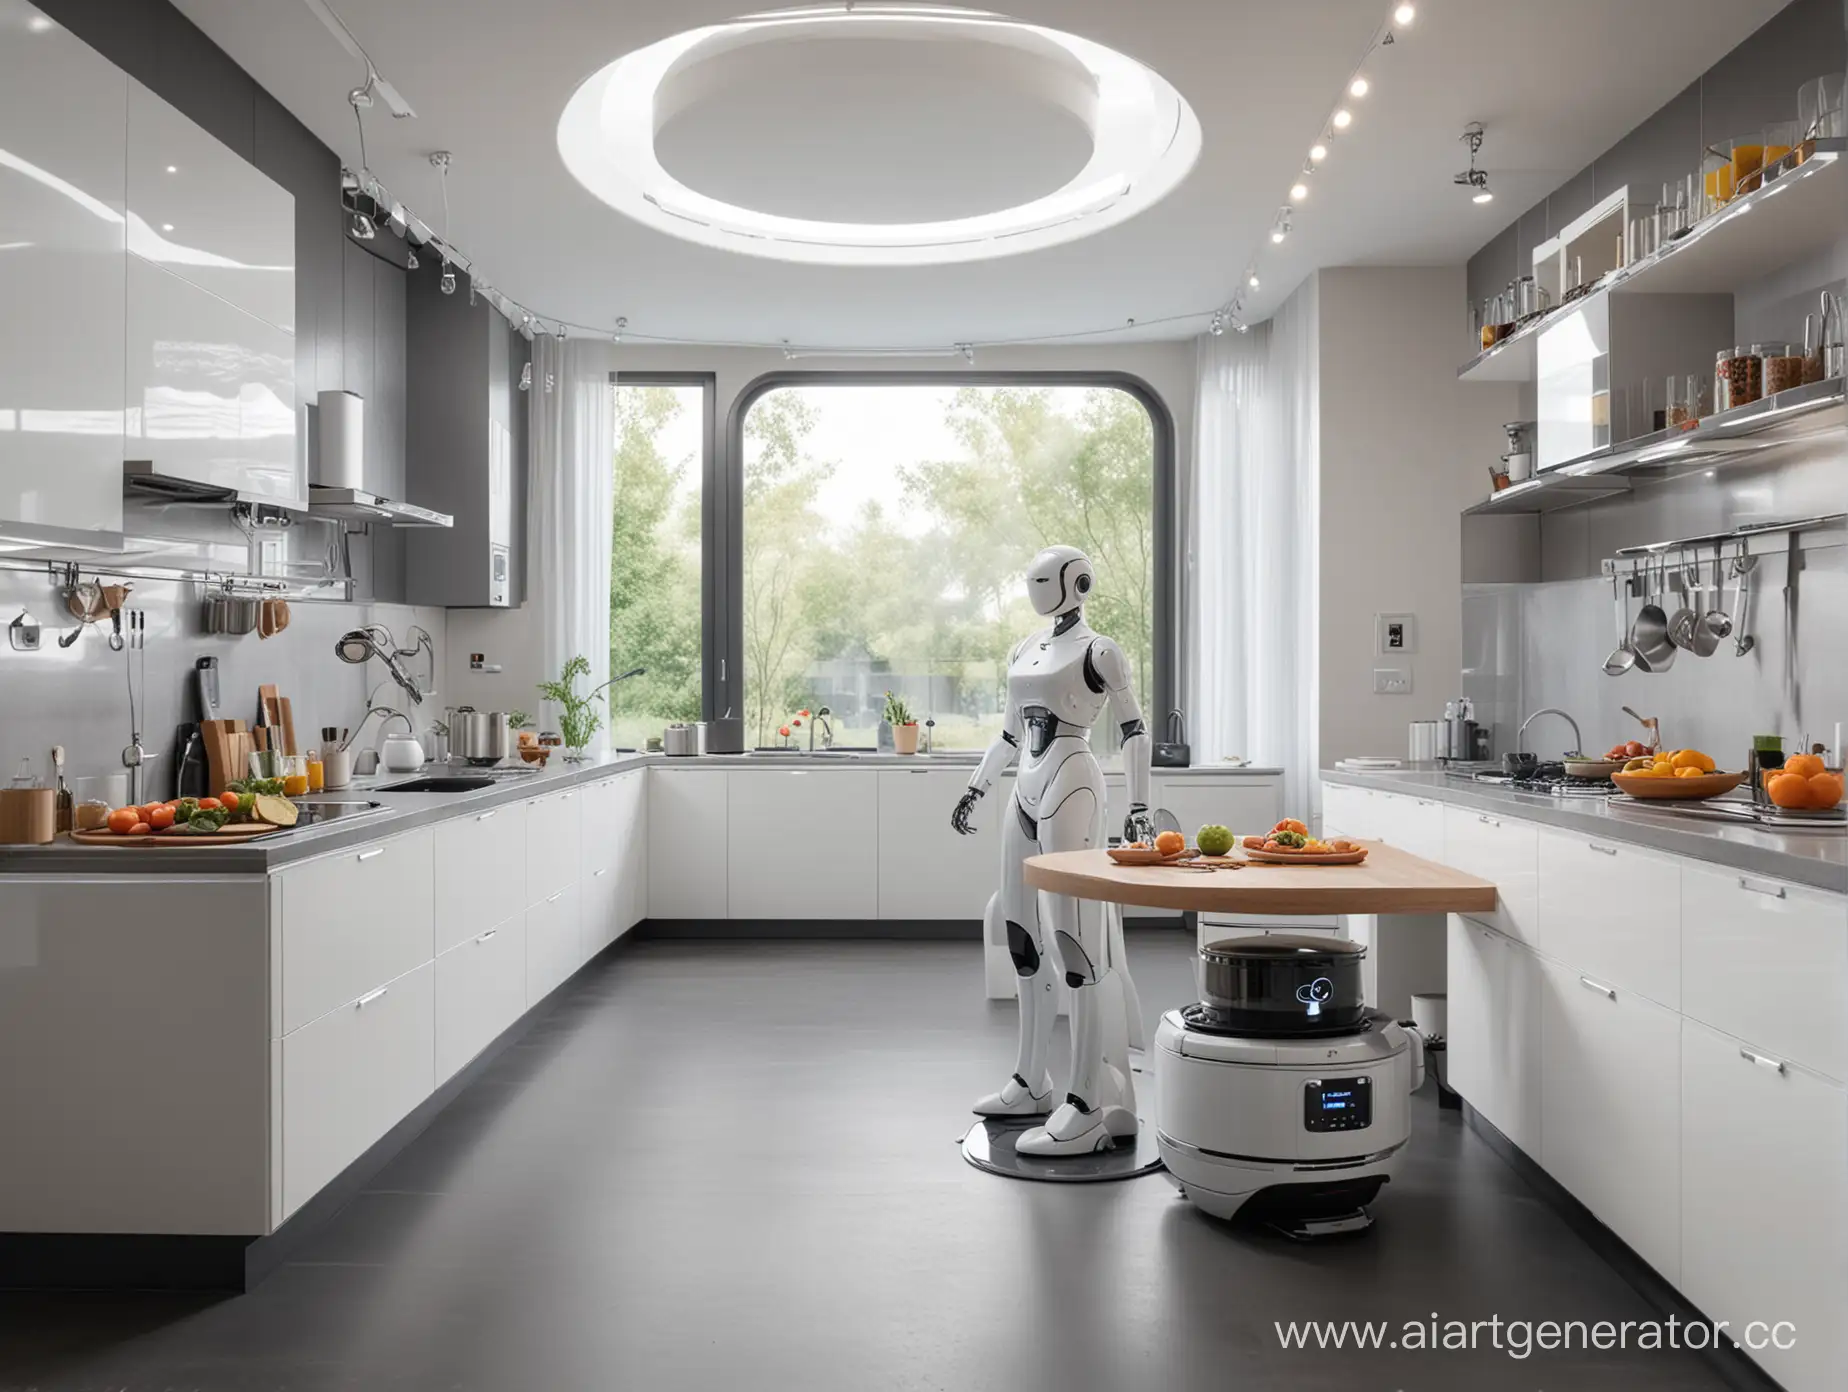 Futuristic-Kitchen-Scene-with-Round-Robot-Cooks-and-Housewives